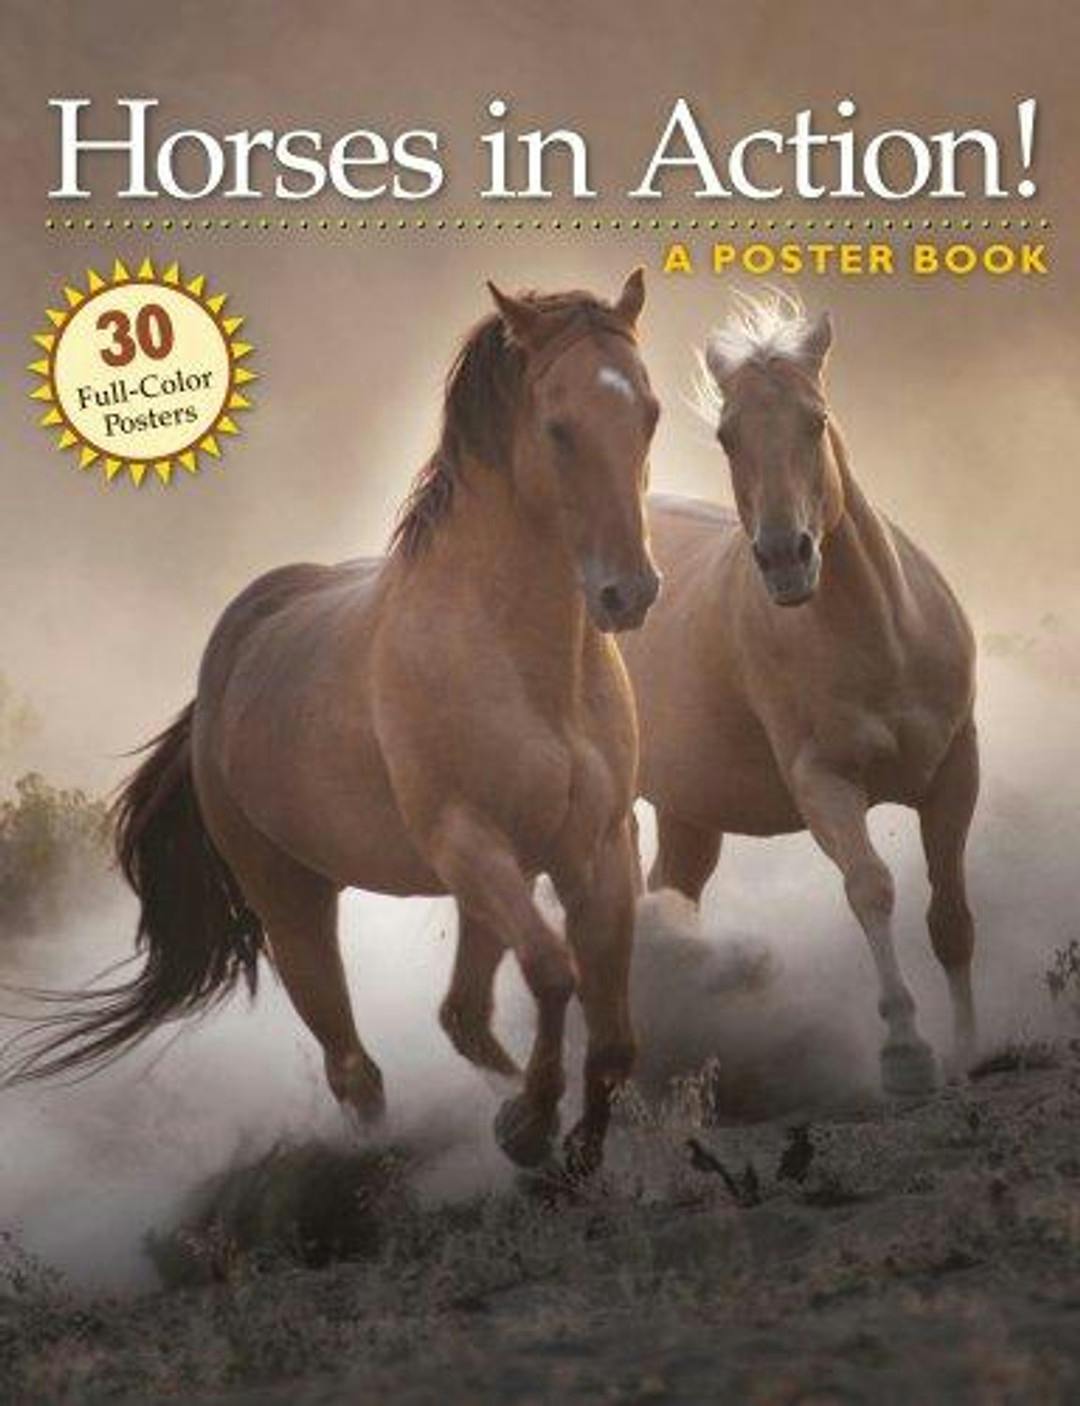 Horses in Action! A Poster Book